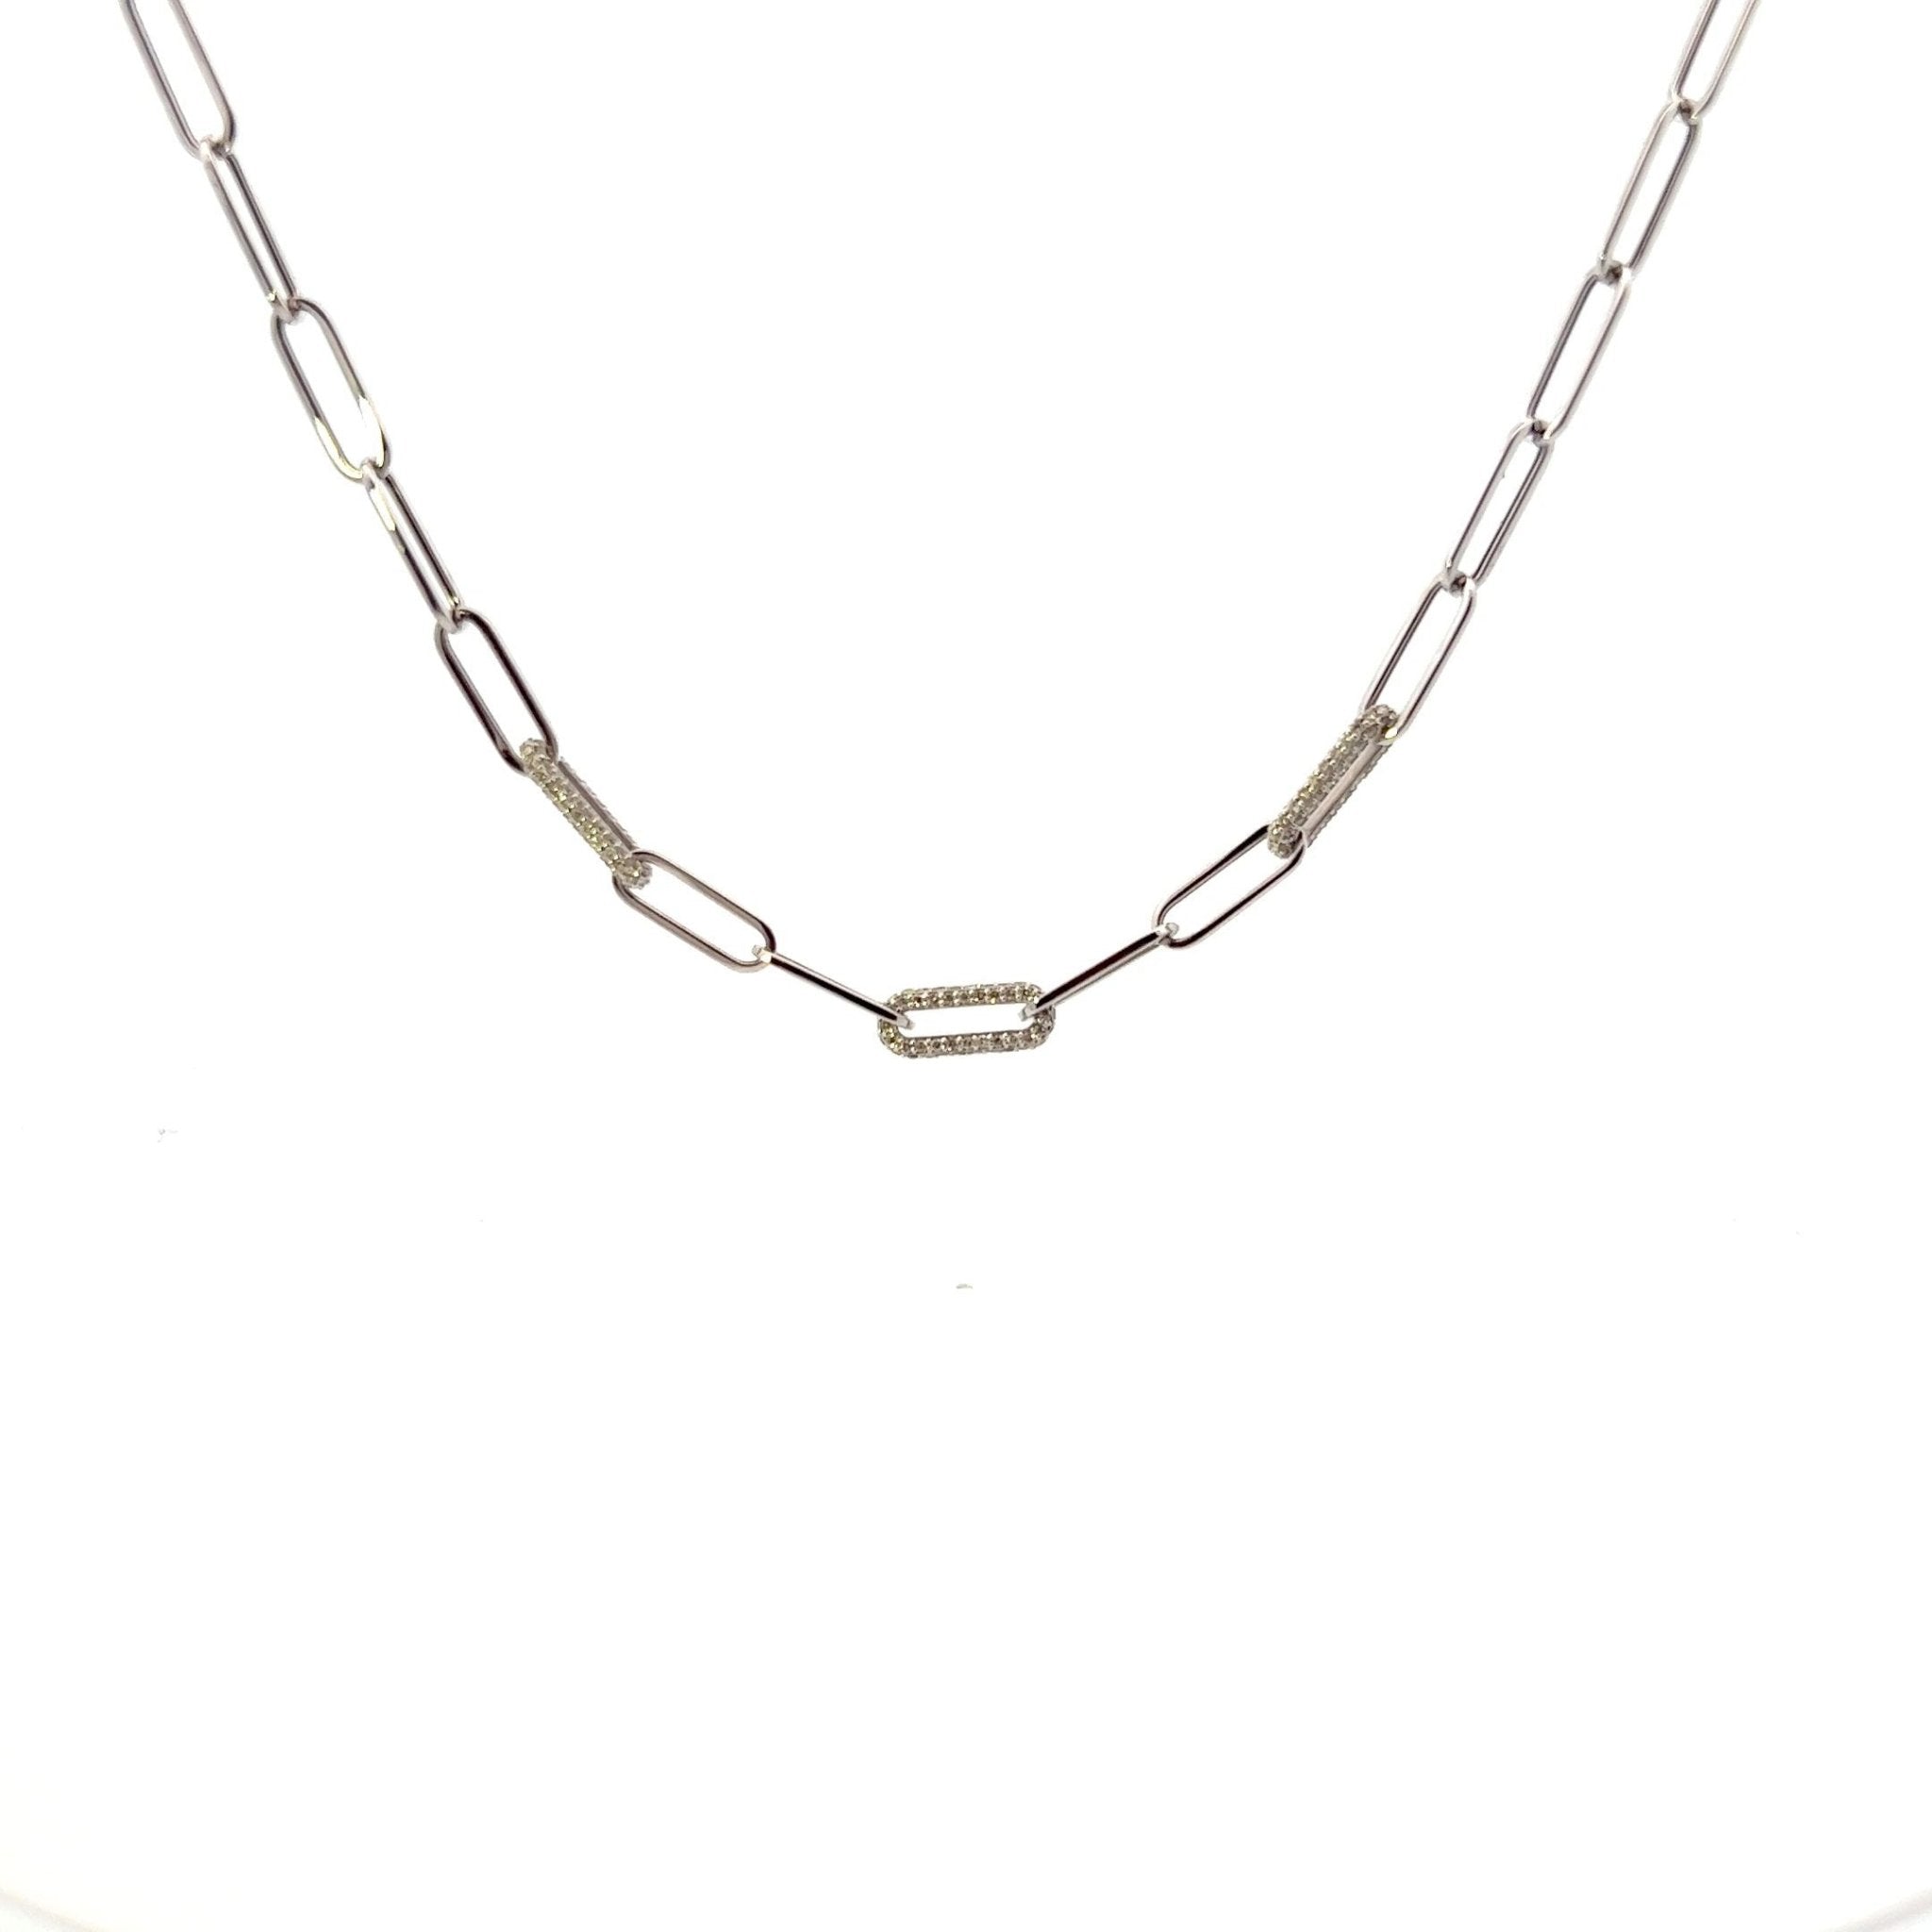 14K Yellow Gold Chunky Paperclip Necklace With a Lobster Clasp - 18 Inch -  ACCR6135118